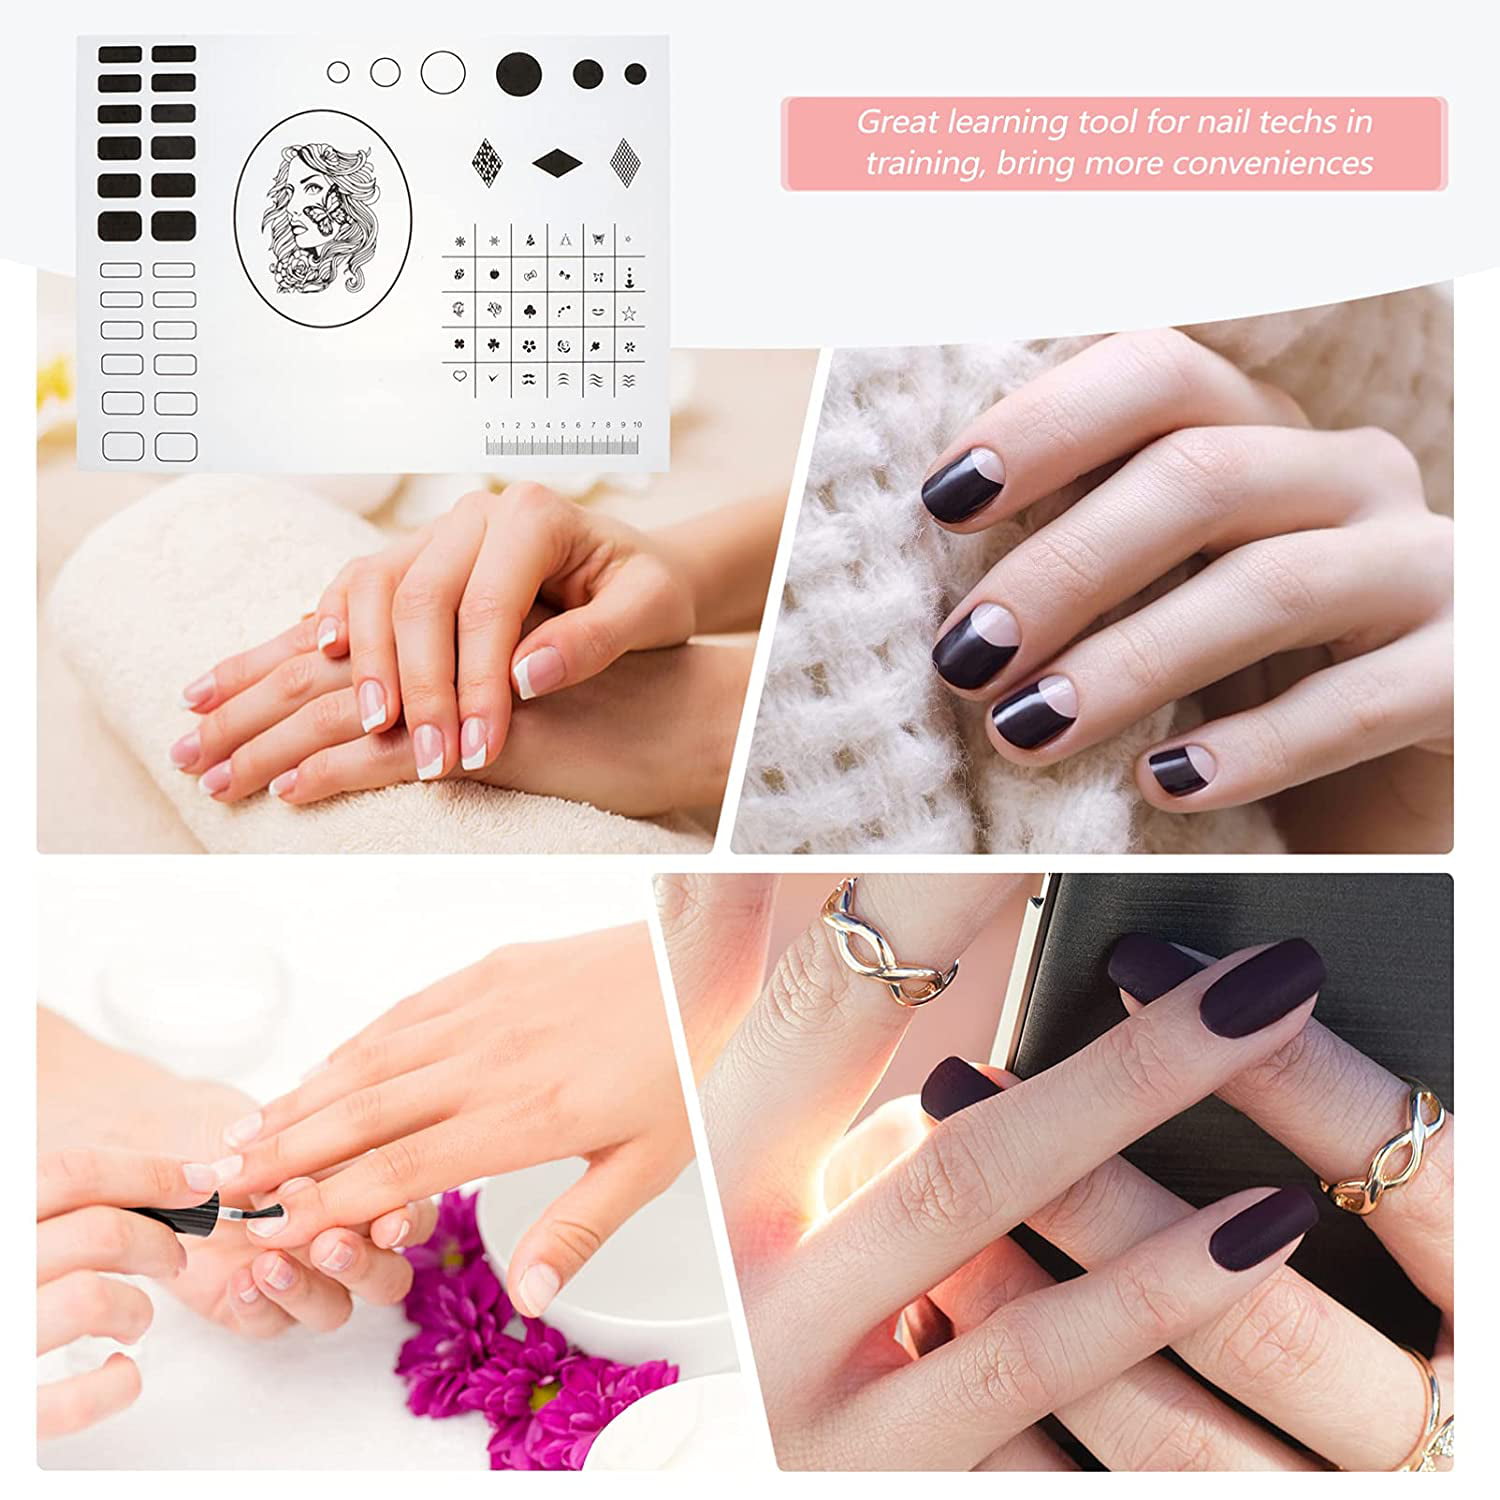 Nail Art Silicone Washable Mat Pad Acrylic Nails Practice Training Mats  Manicure Tool for Nail Technican - AliExpress